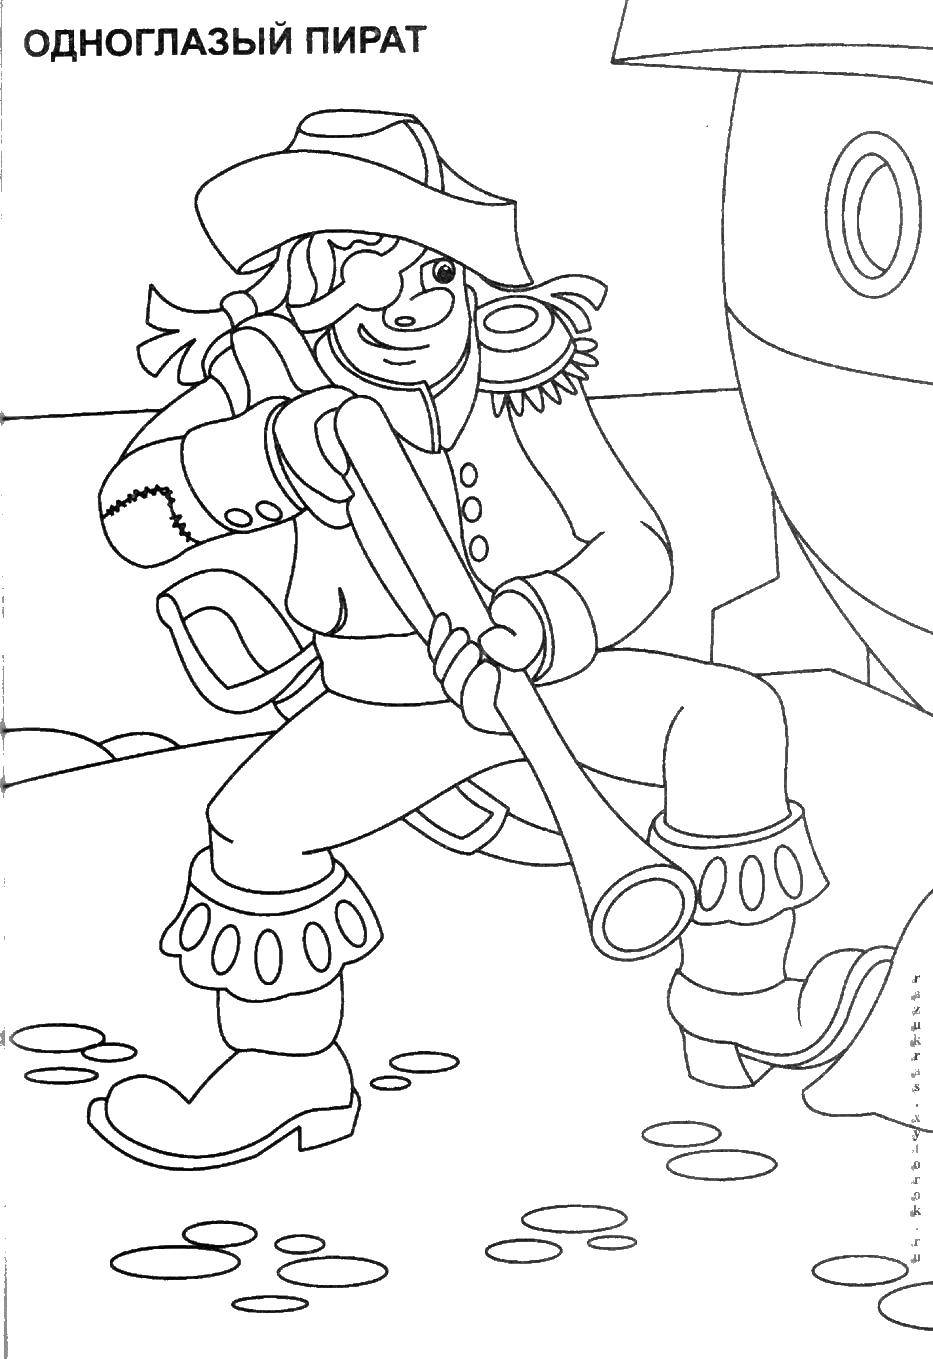 Coloring One-eyed pirate. Category The pirates. Tags:  Pirate, saber.